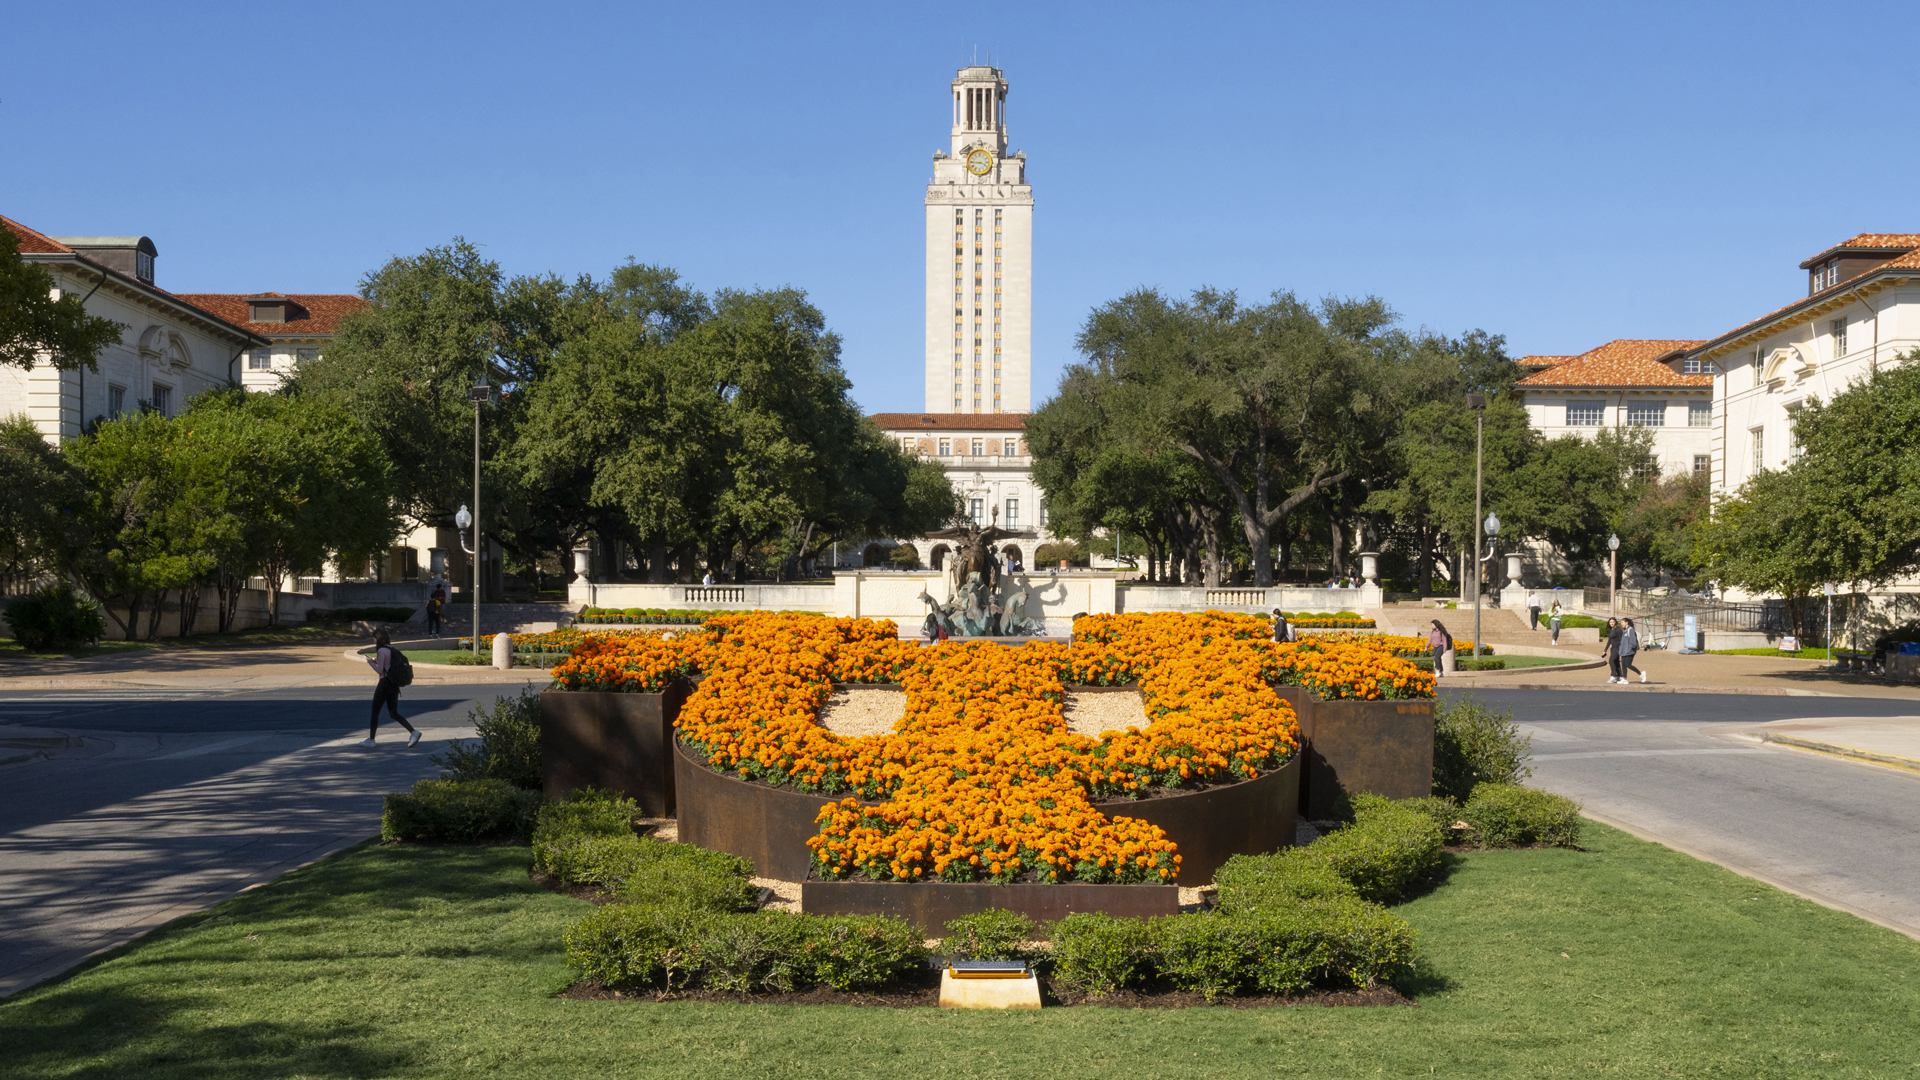 Photo of UT Tower with flowers in foreground.